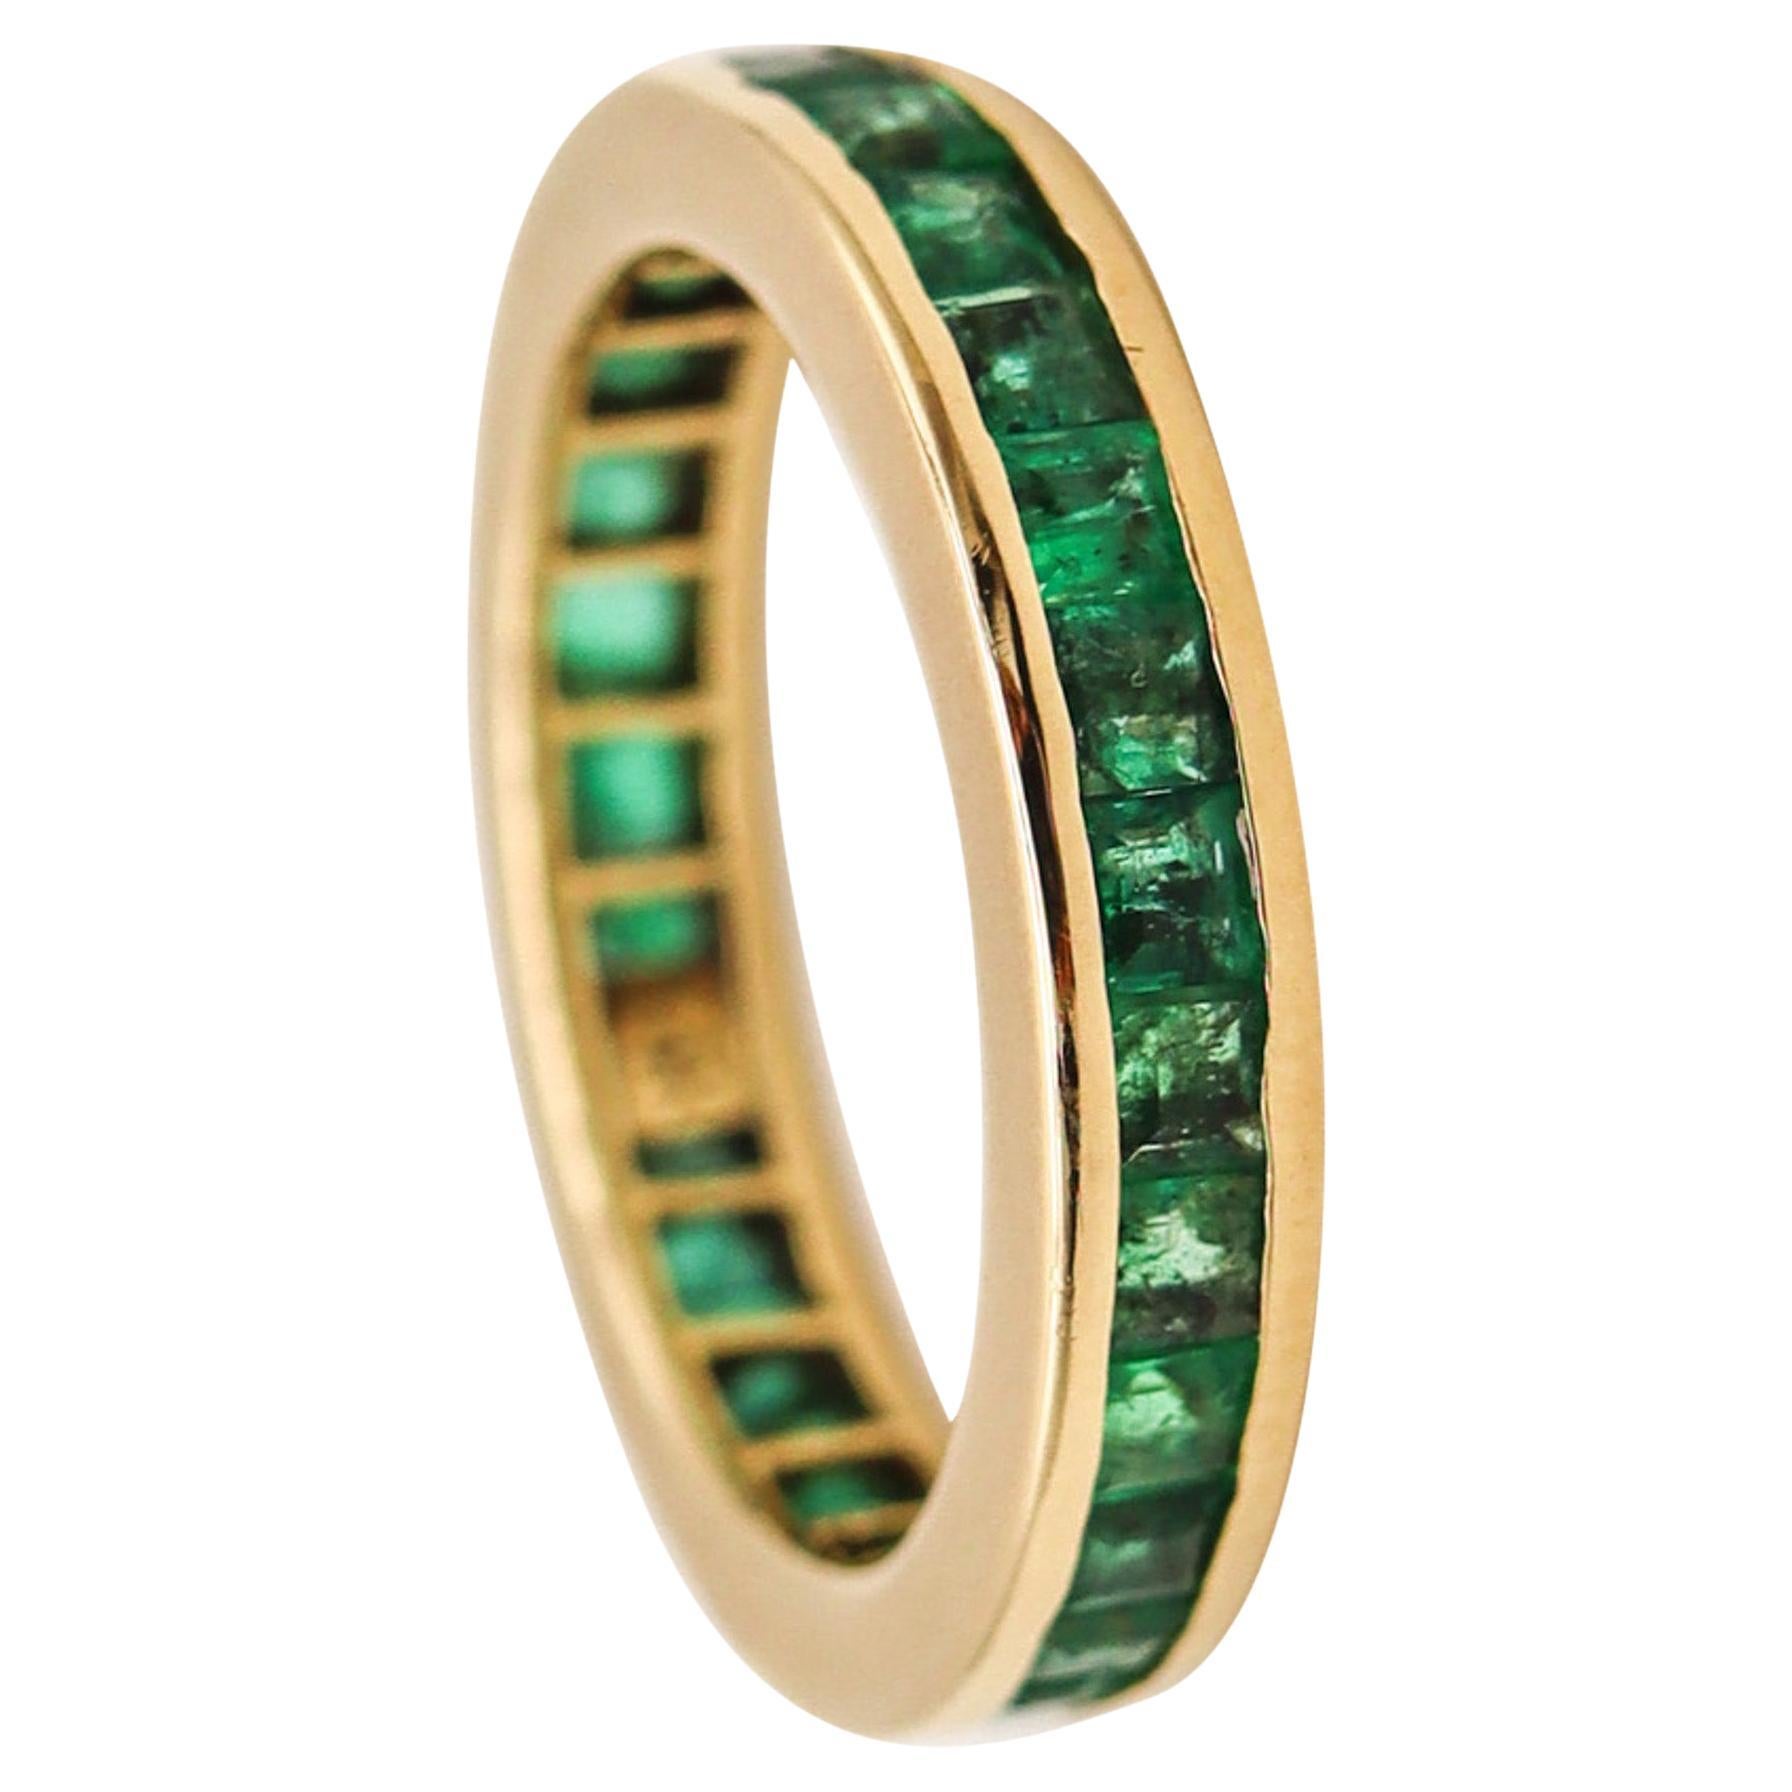 Italian Eternity Ring Band In 14 Kt Yellow Gold With 2.10 Ctw In Vivid Emeralds